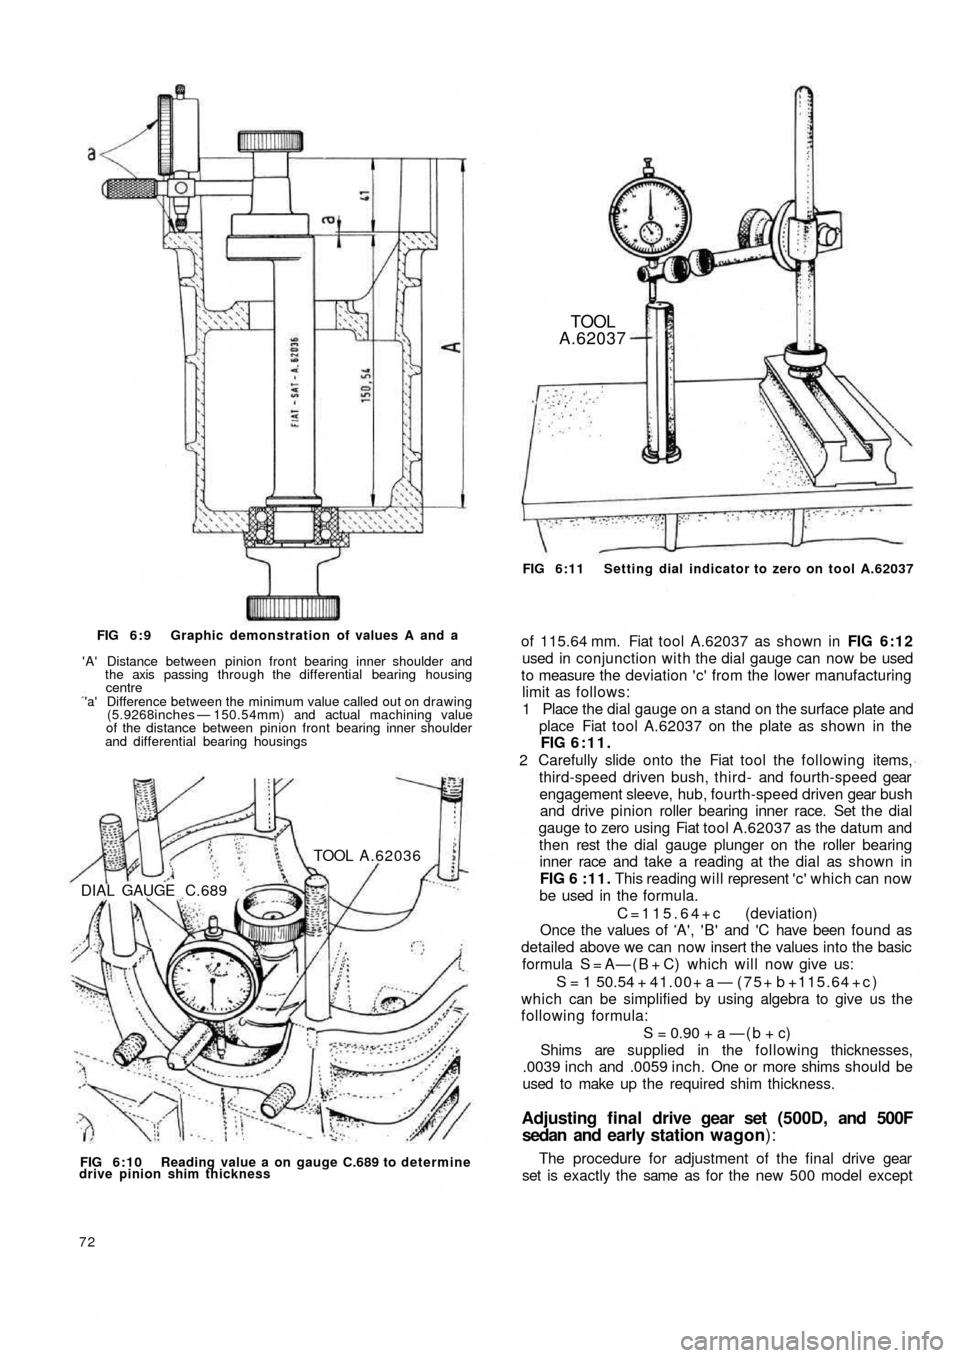 FIAT 500 1957 1.G Repair Manual FIG 6:9  Graphic demonstration of values A and a
A Distance between pinion front bearing inner shoulder and
the axis passing through the differential bearing housing
centrea Difference between the